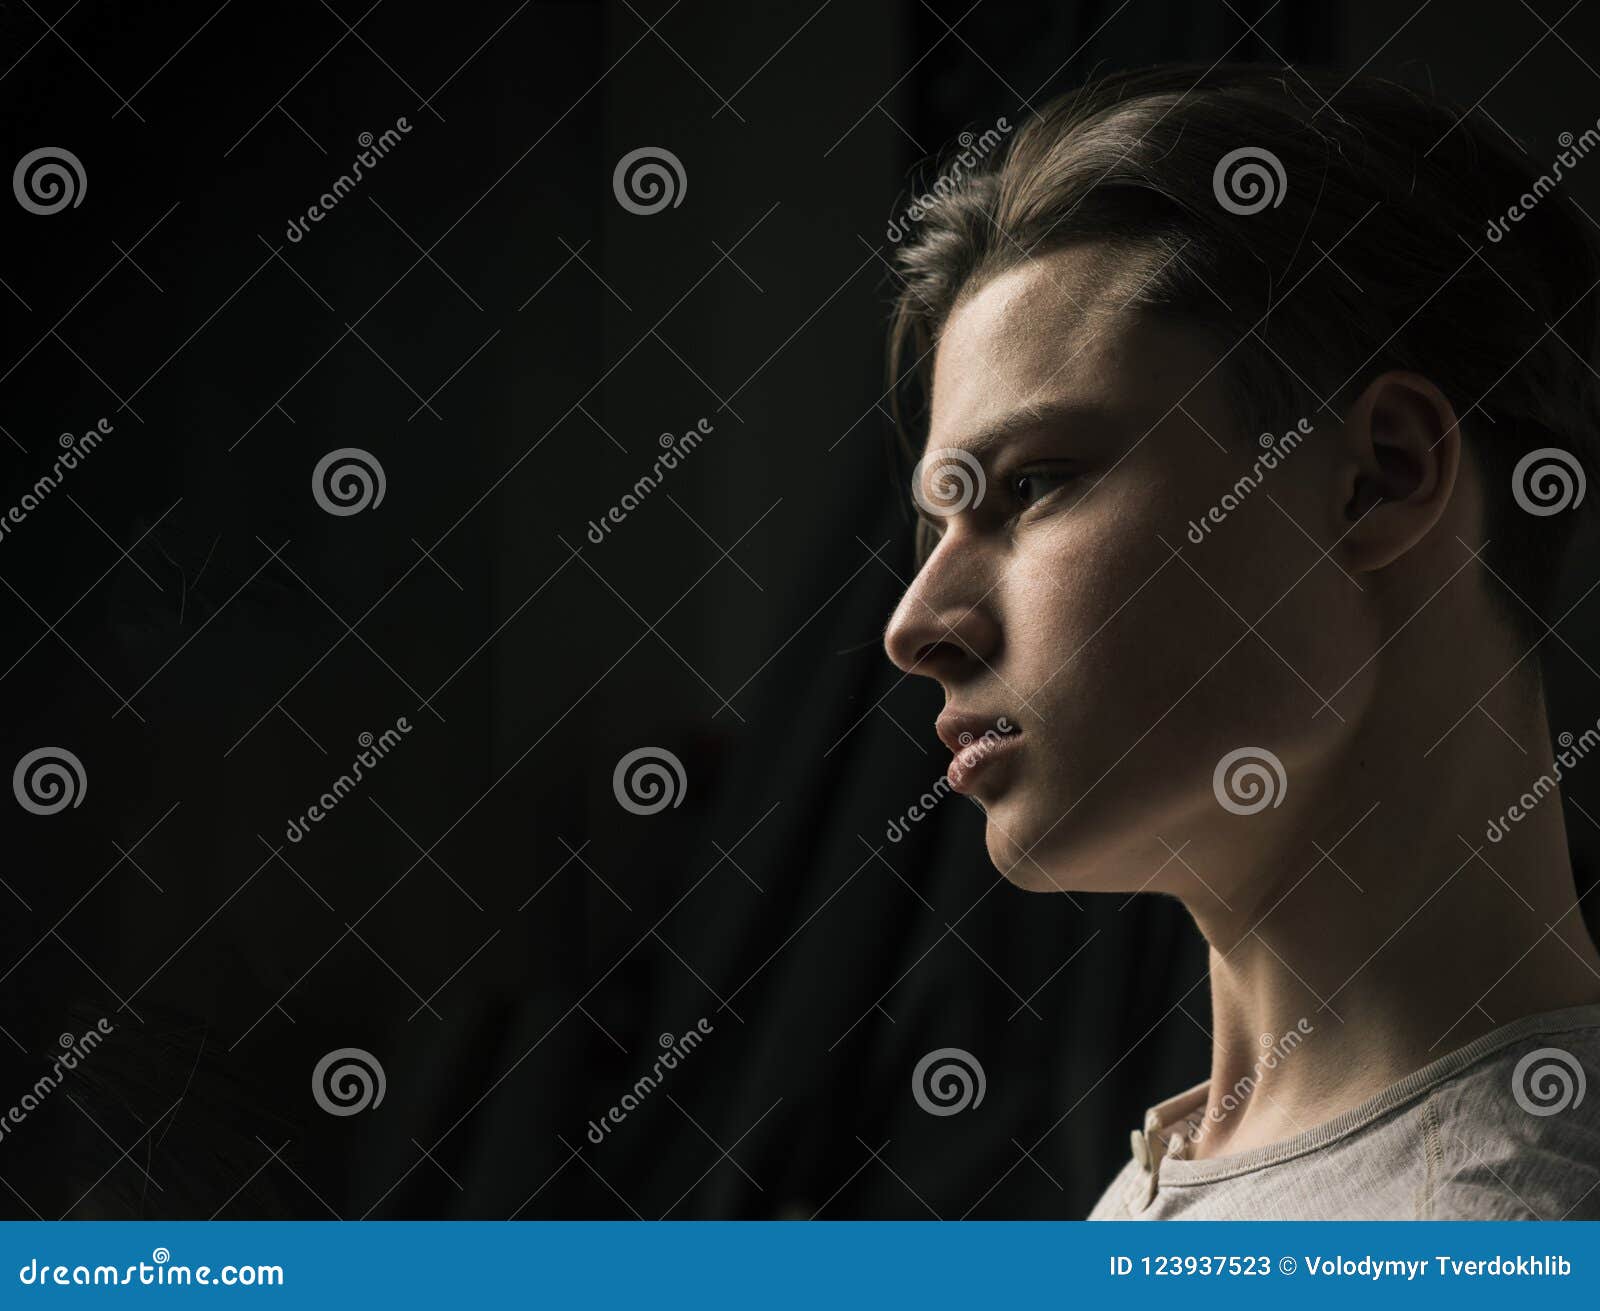 Guy on Confident Face in Light Shirt, Black Background. Macho with ...